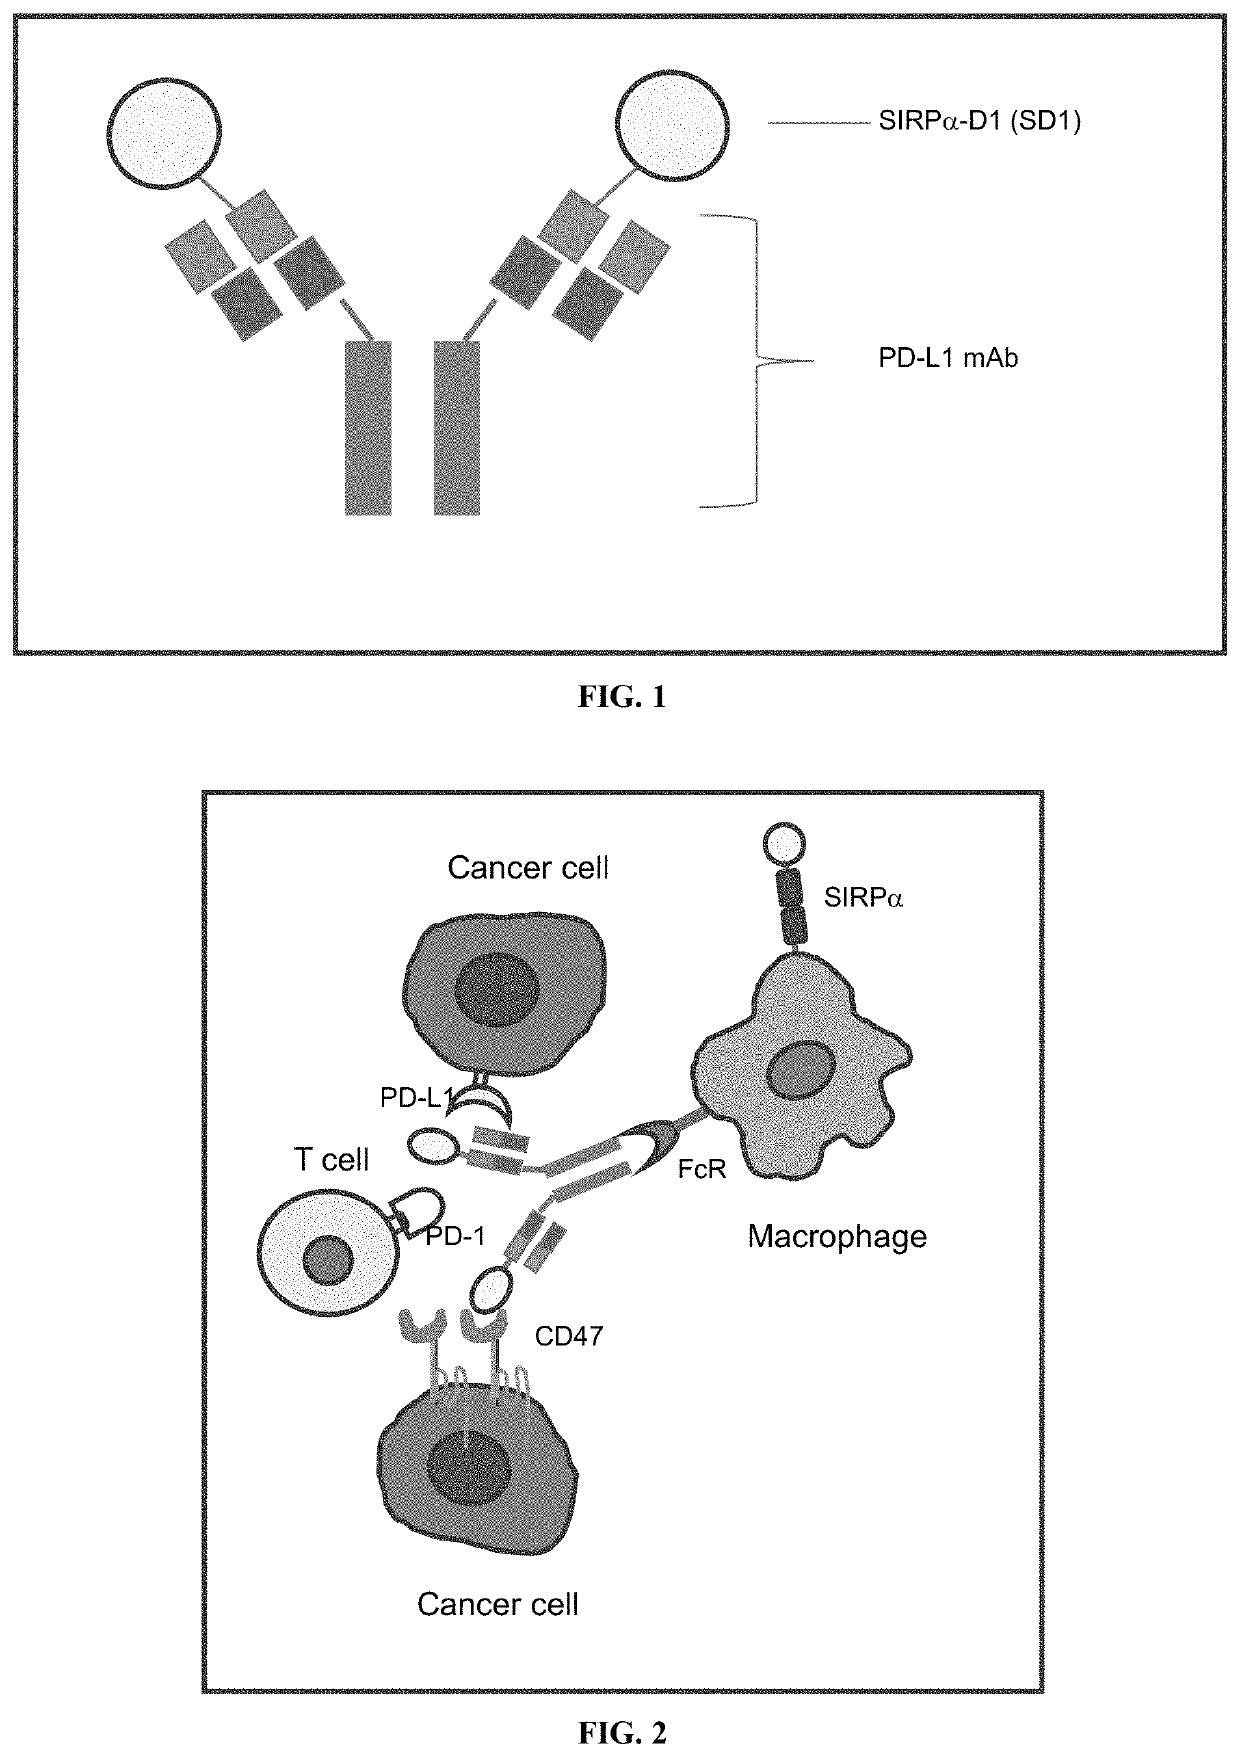 Recombinant fusion protein containing an anti-PD-L1 antibody